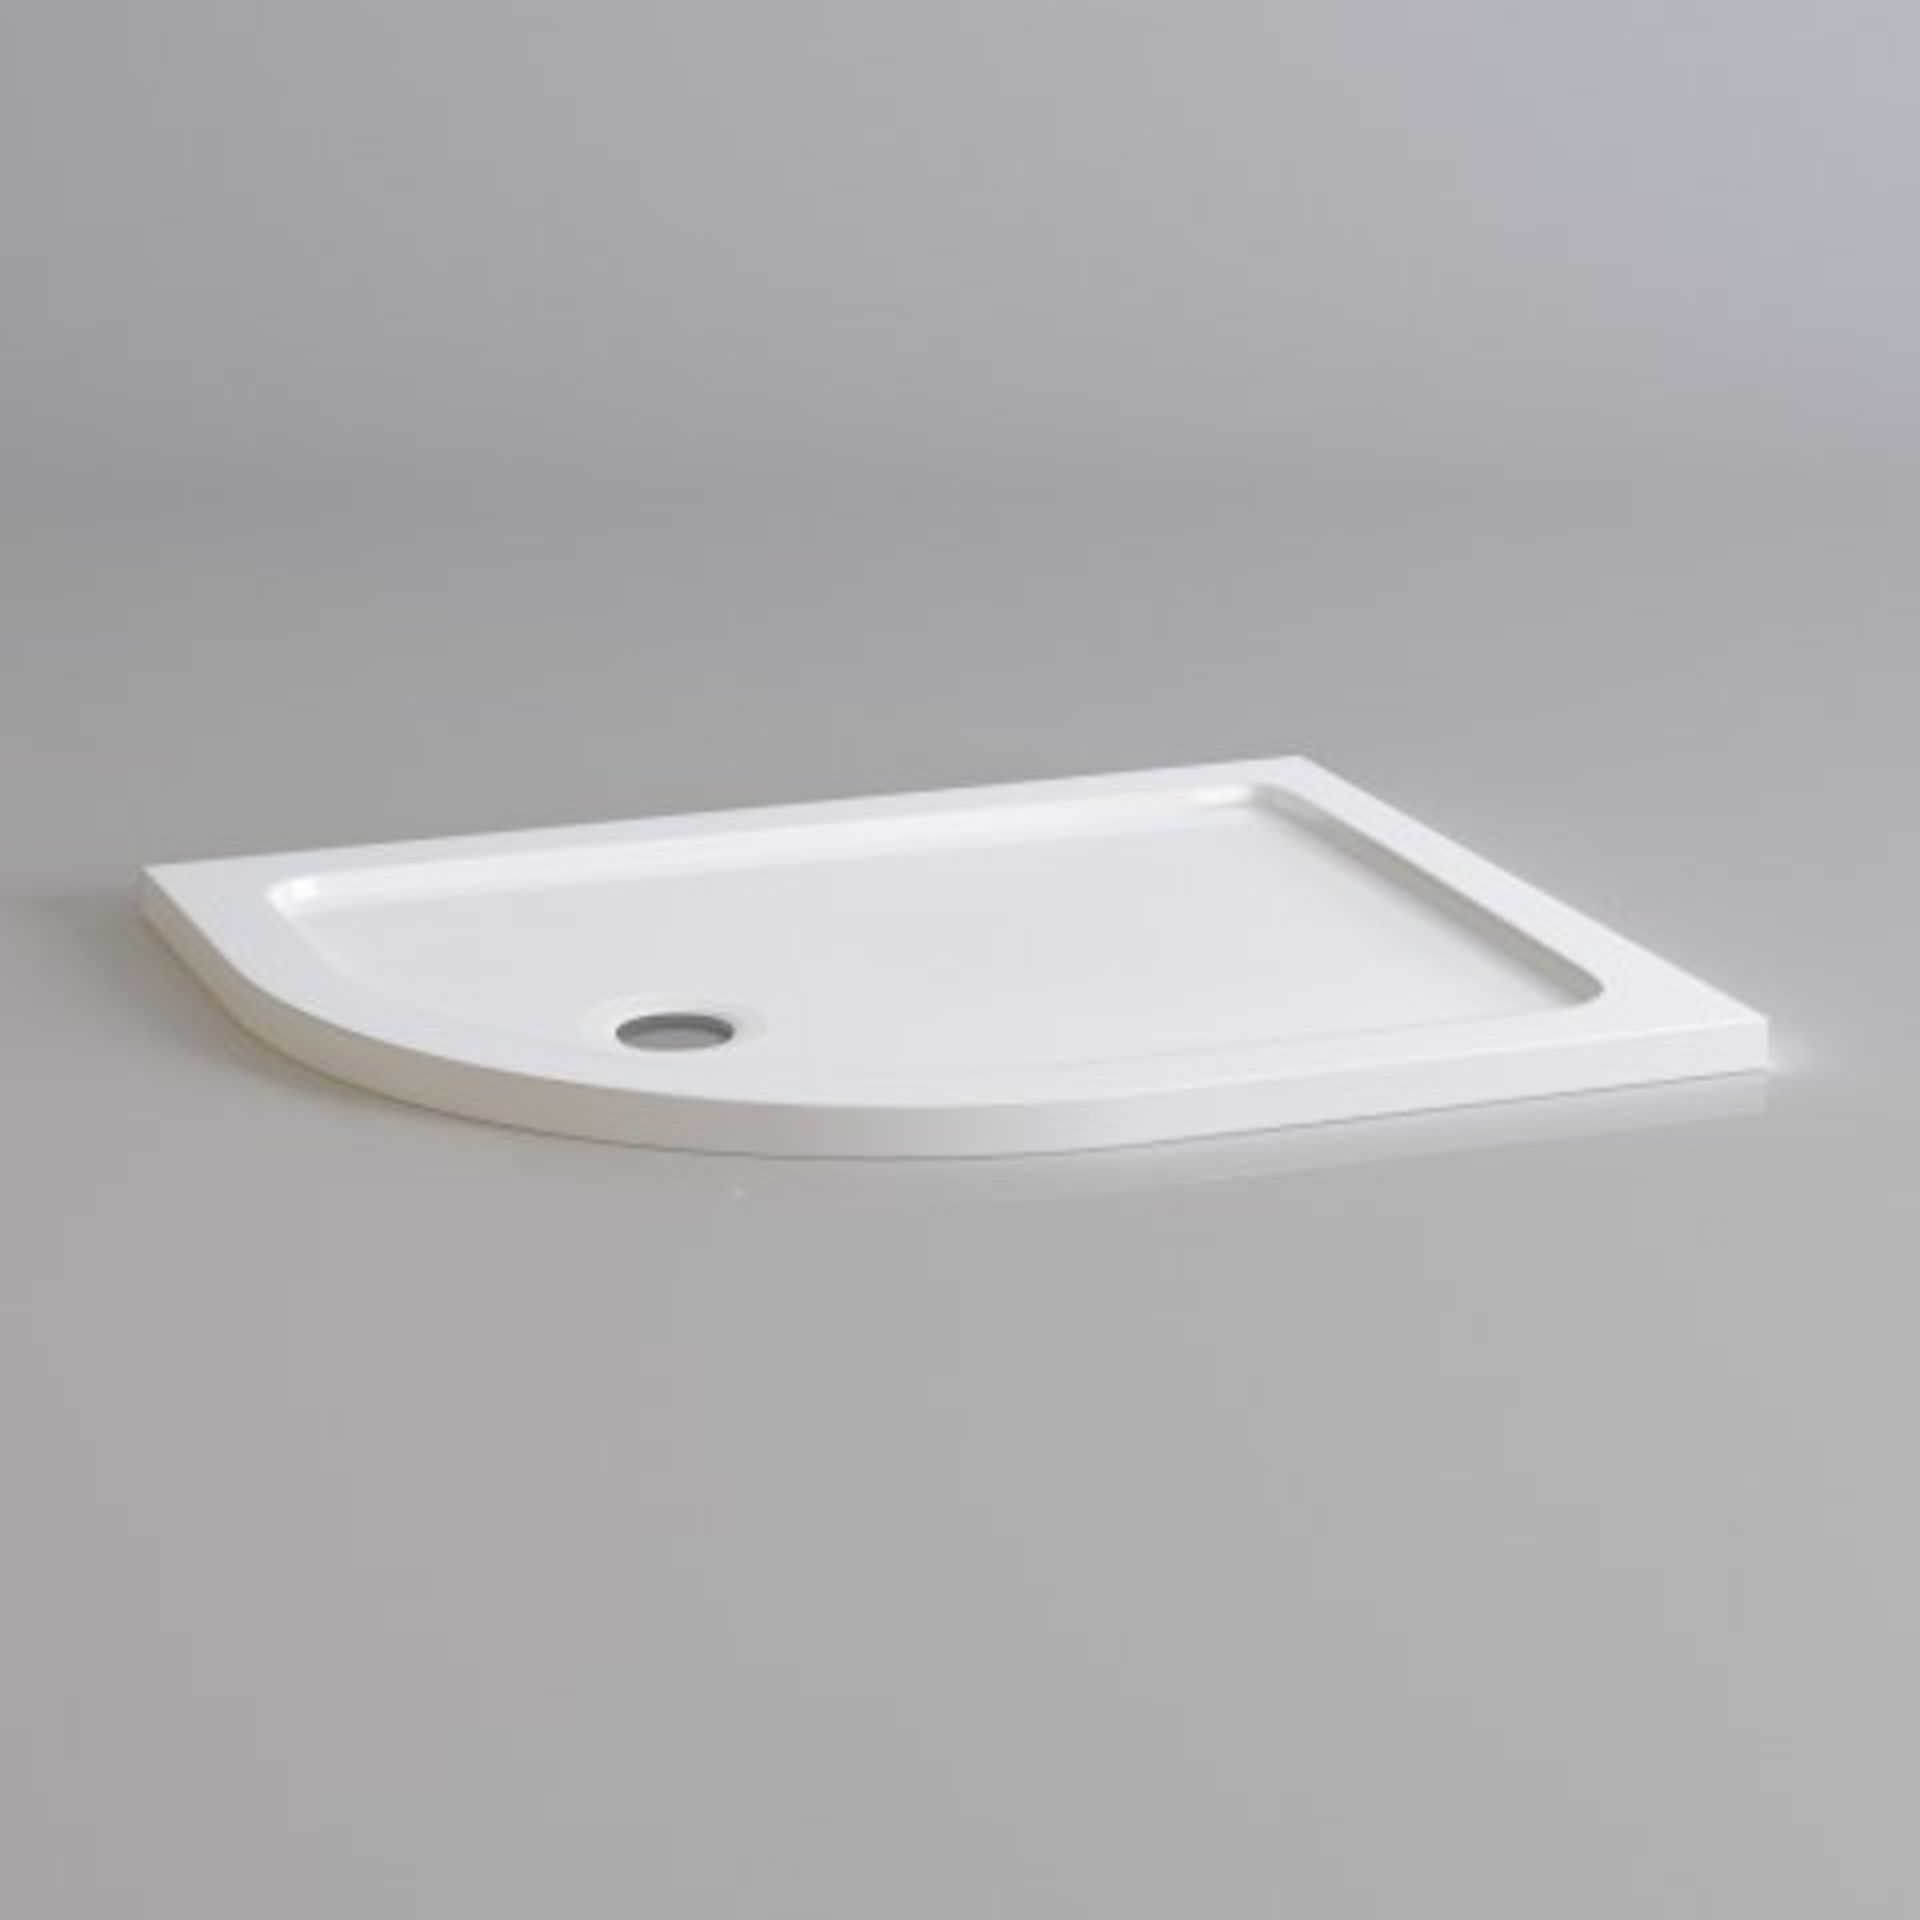 (H54) 1000x800mm Offset Quadrant Ultraslim Stone Shower Tray - Left. RRP £249.99. Designed and